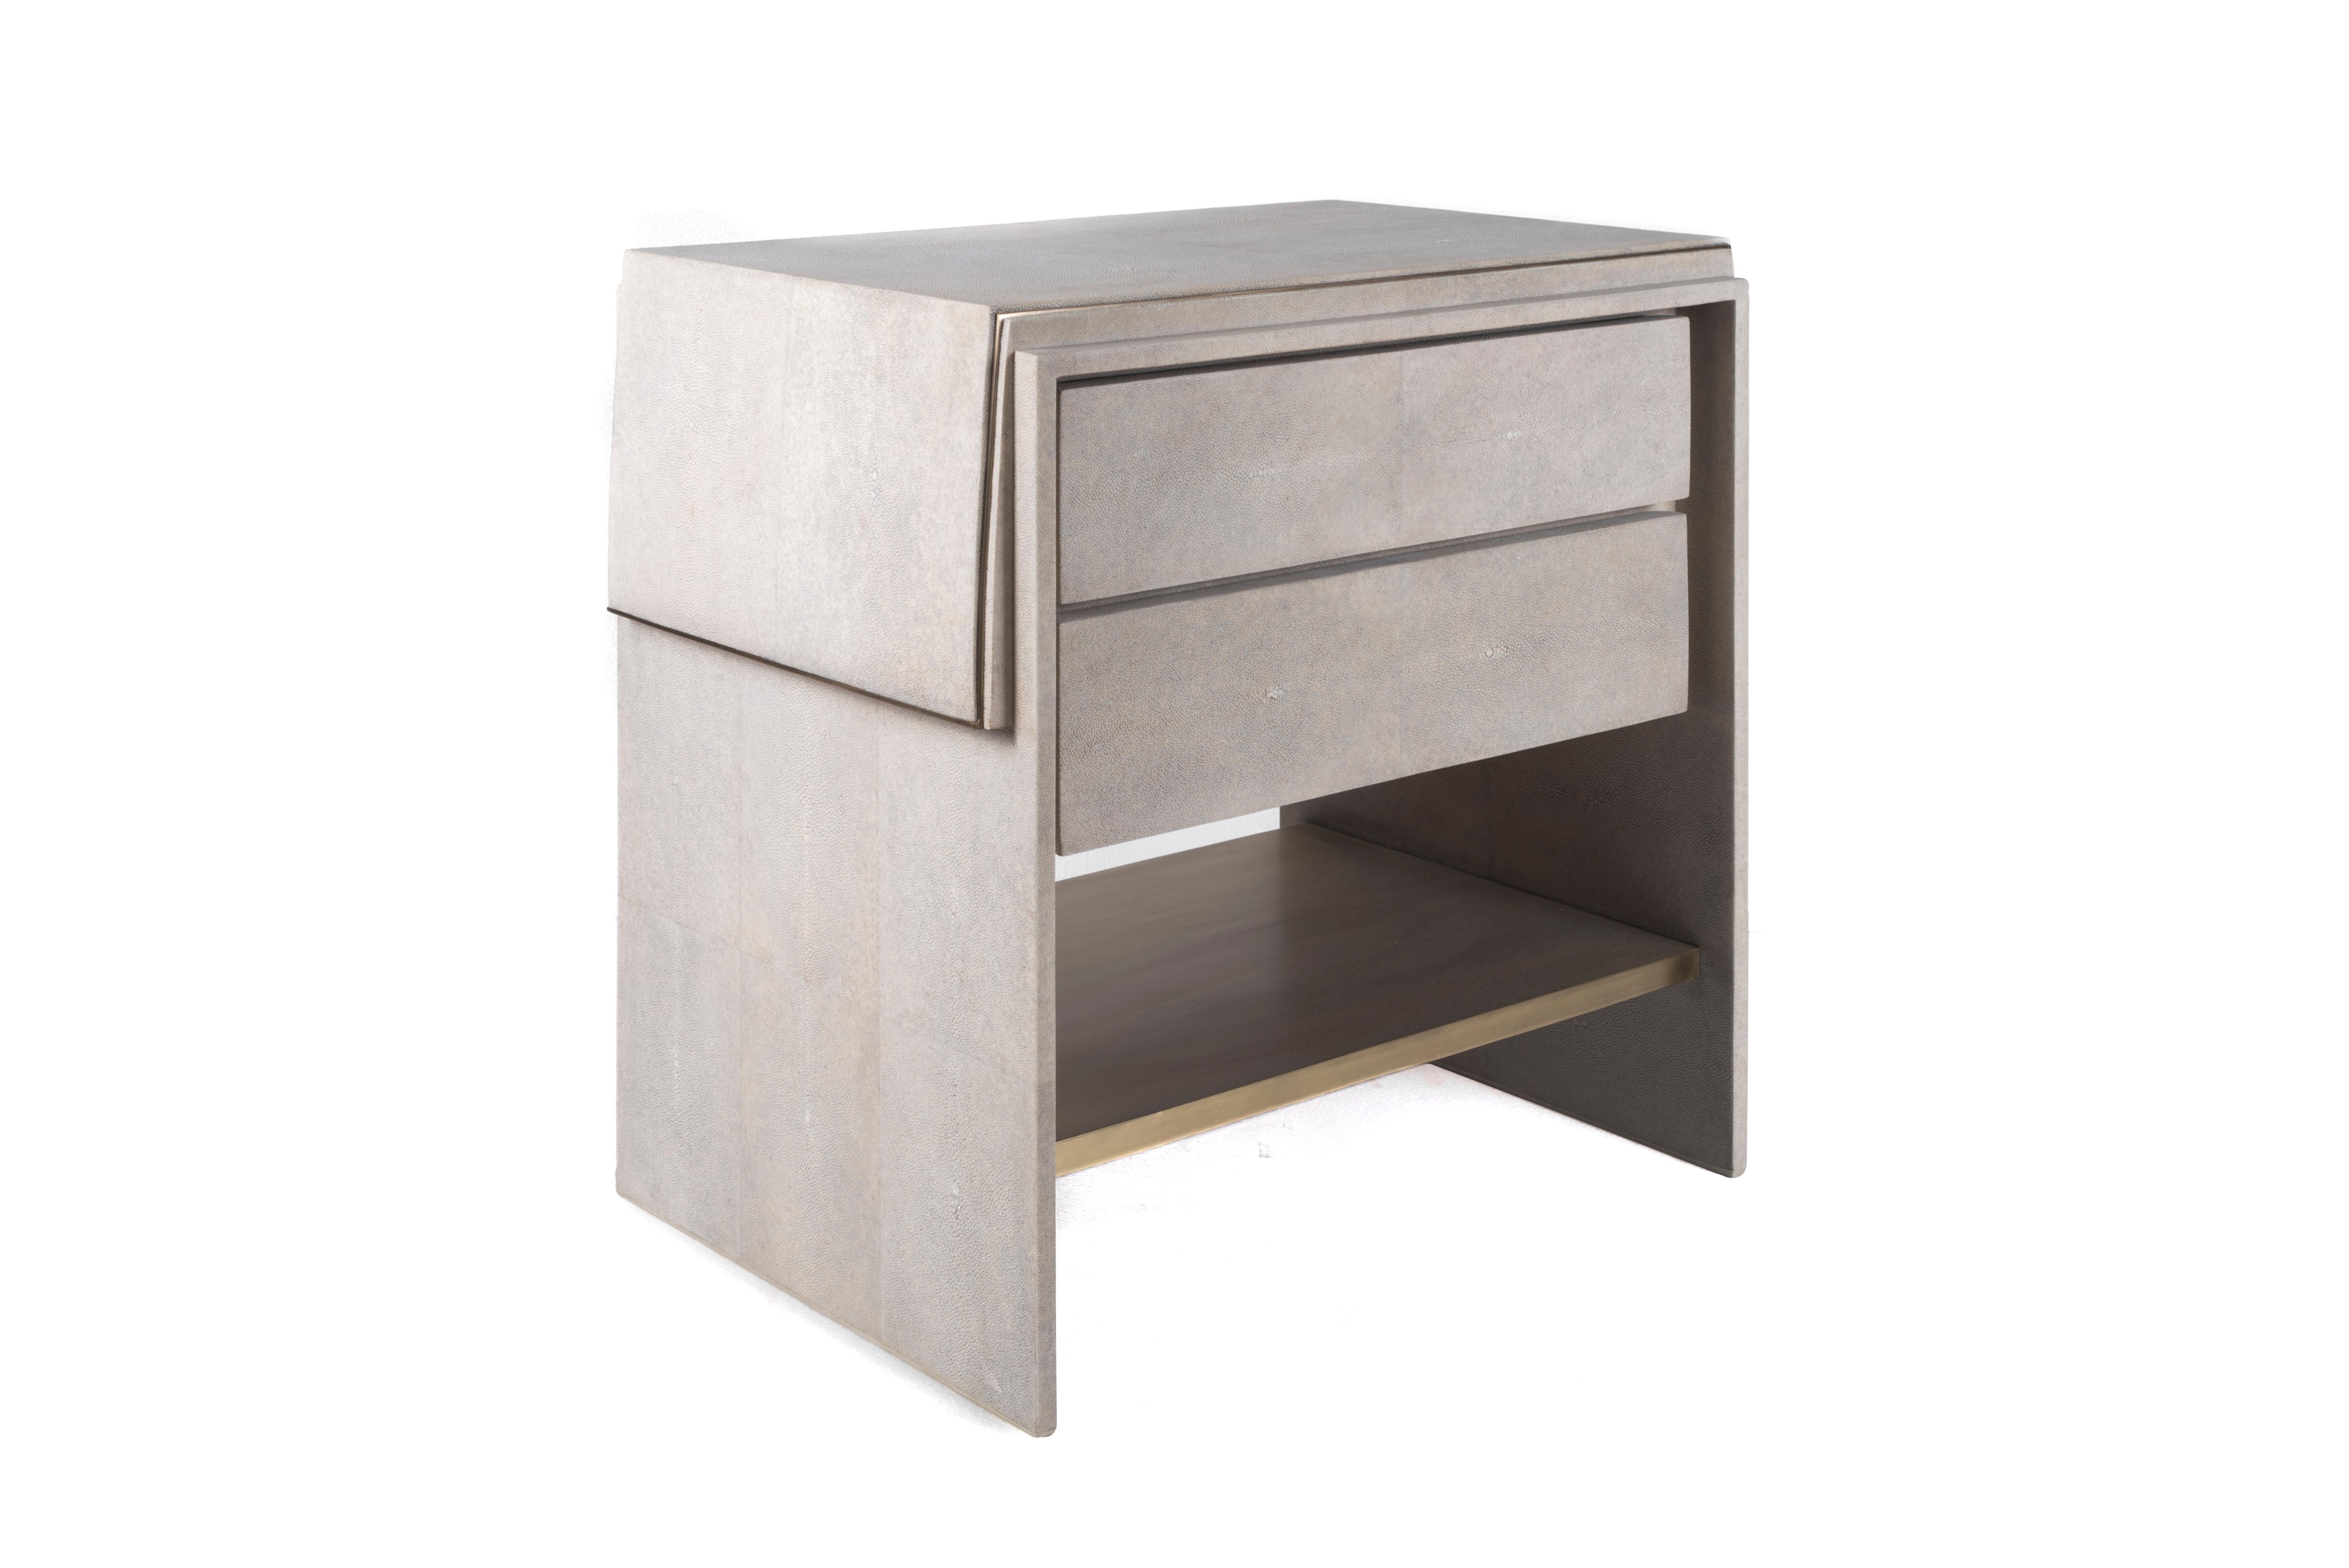 The Waldorf bedside by R&Y Augousti is a modern and elegant piece. This bedside table has subtle geometry with its asymmetric cream shagreen overlay. The piece is completely inlaid in cream shagreen, but includes subtle details in bronze patina